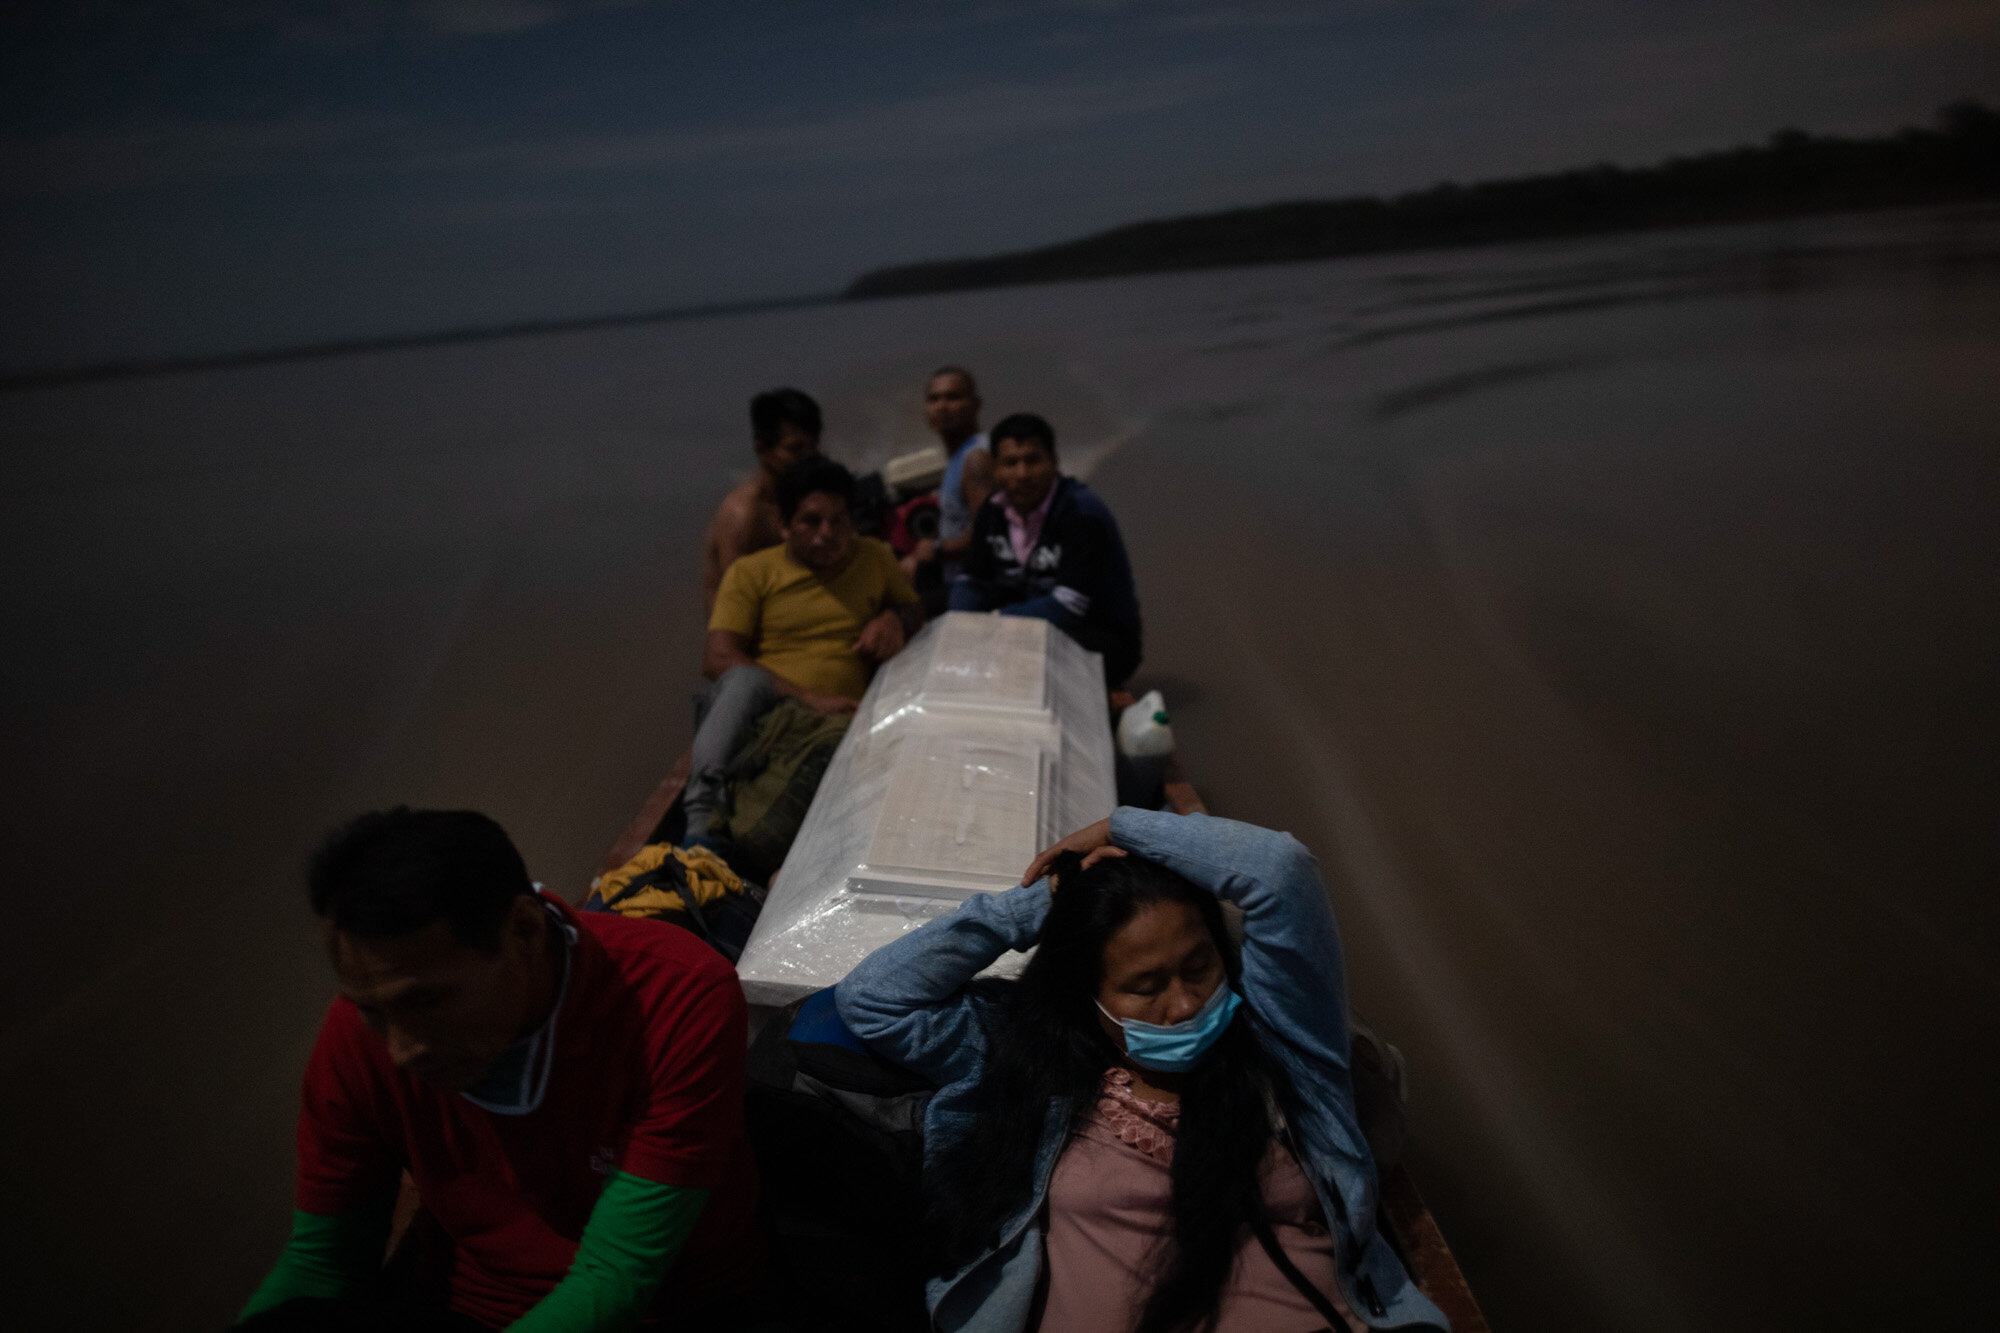  Relatives accompany the coffin that contains the remains of Jose Barbaran, who is believed to have died from complications related to the coronavirus, as they travel by boat on Peru's Ucayali River on Sept. 29, 2020. Despite the risk, family members